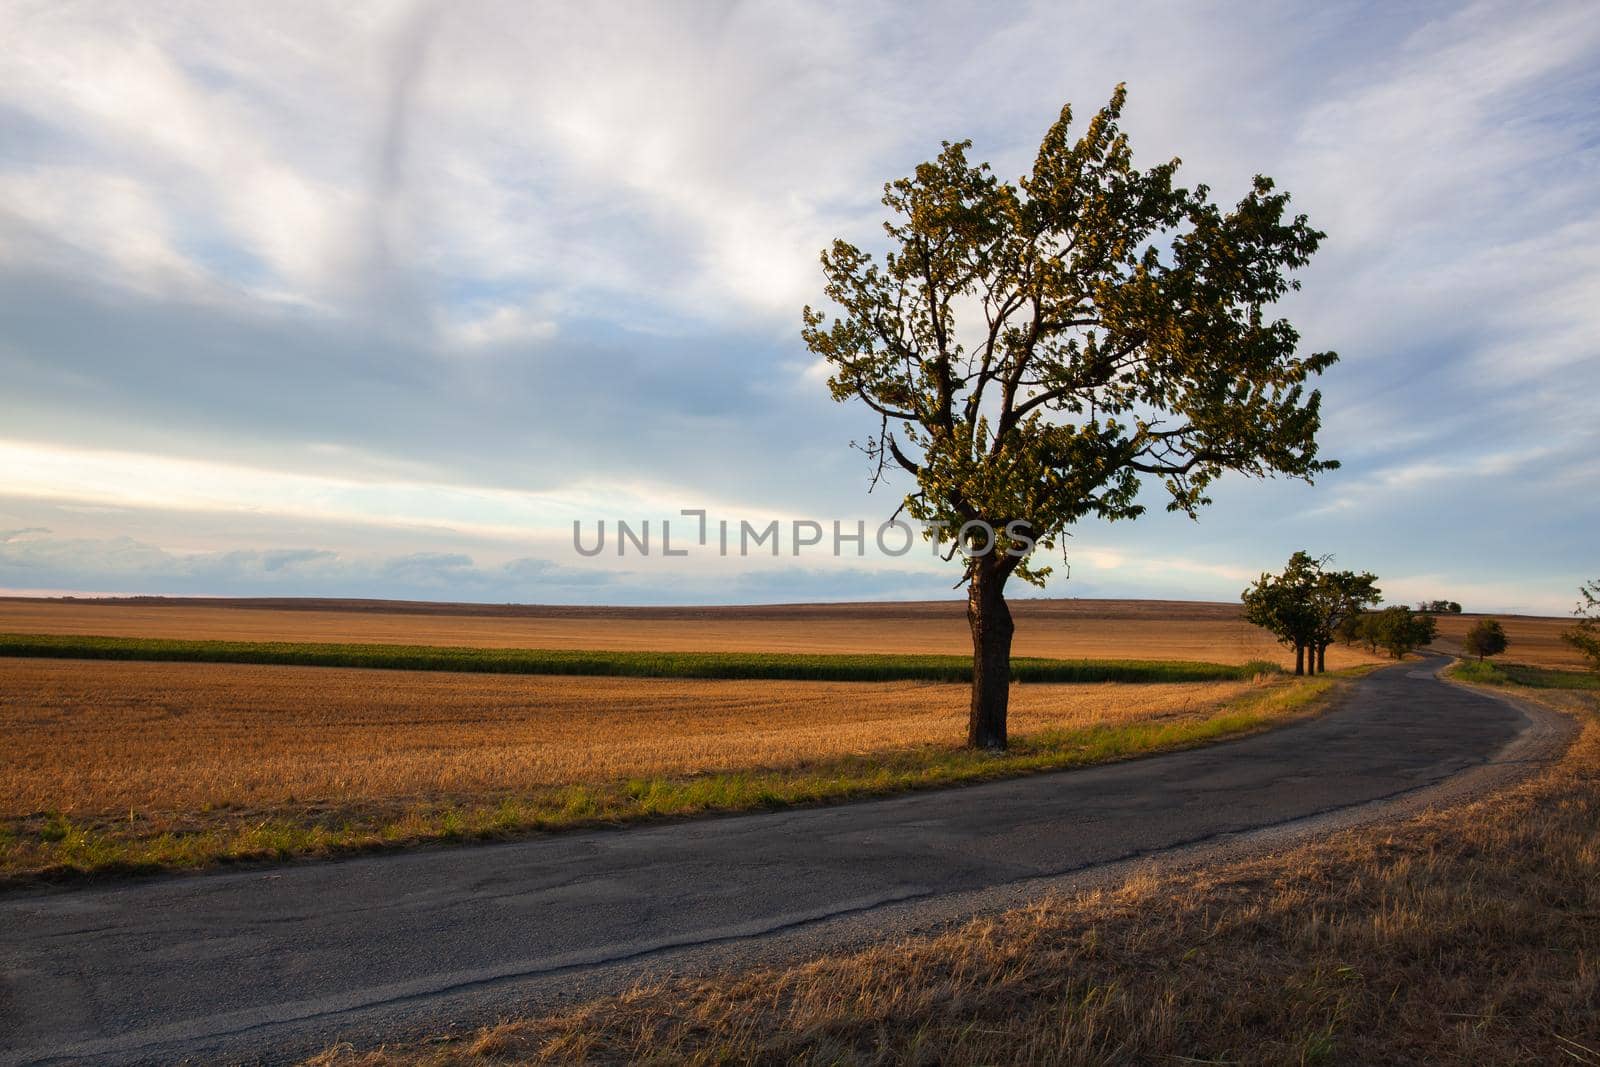 On the road between empty field after harvesting in summer evening. by CaptureLight